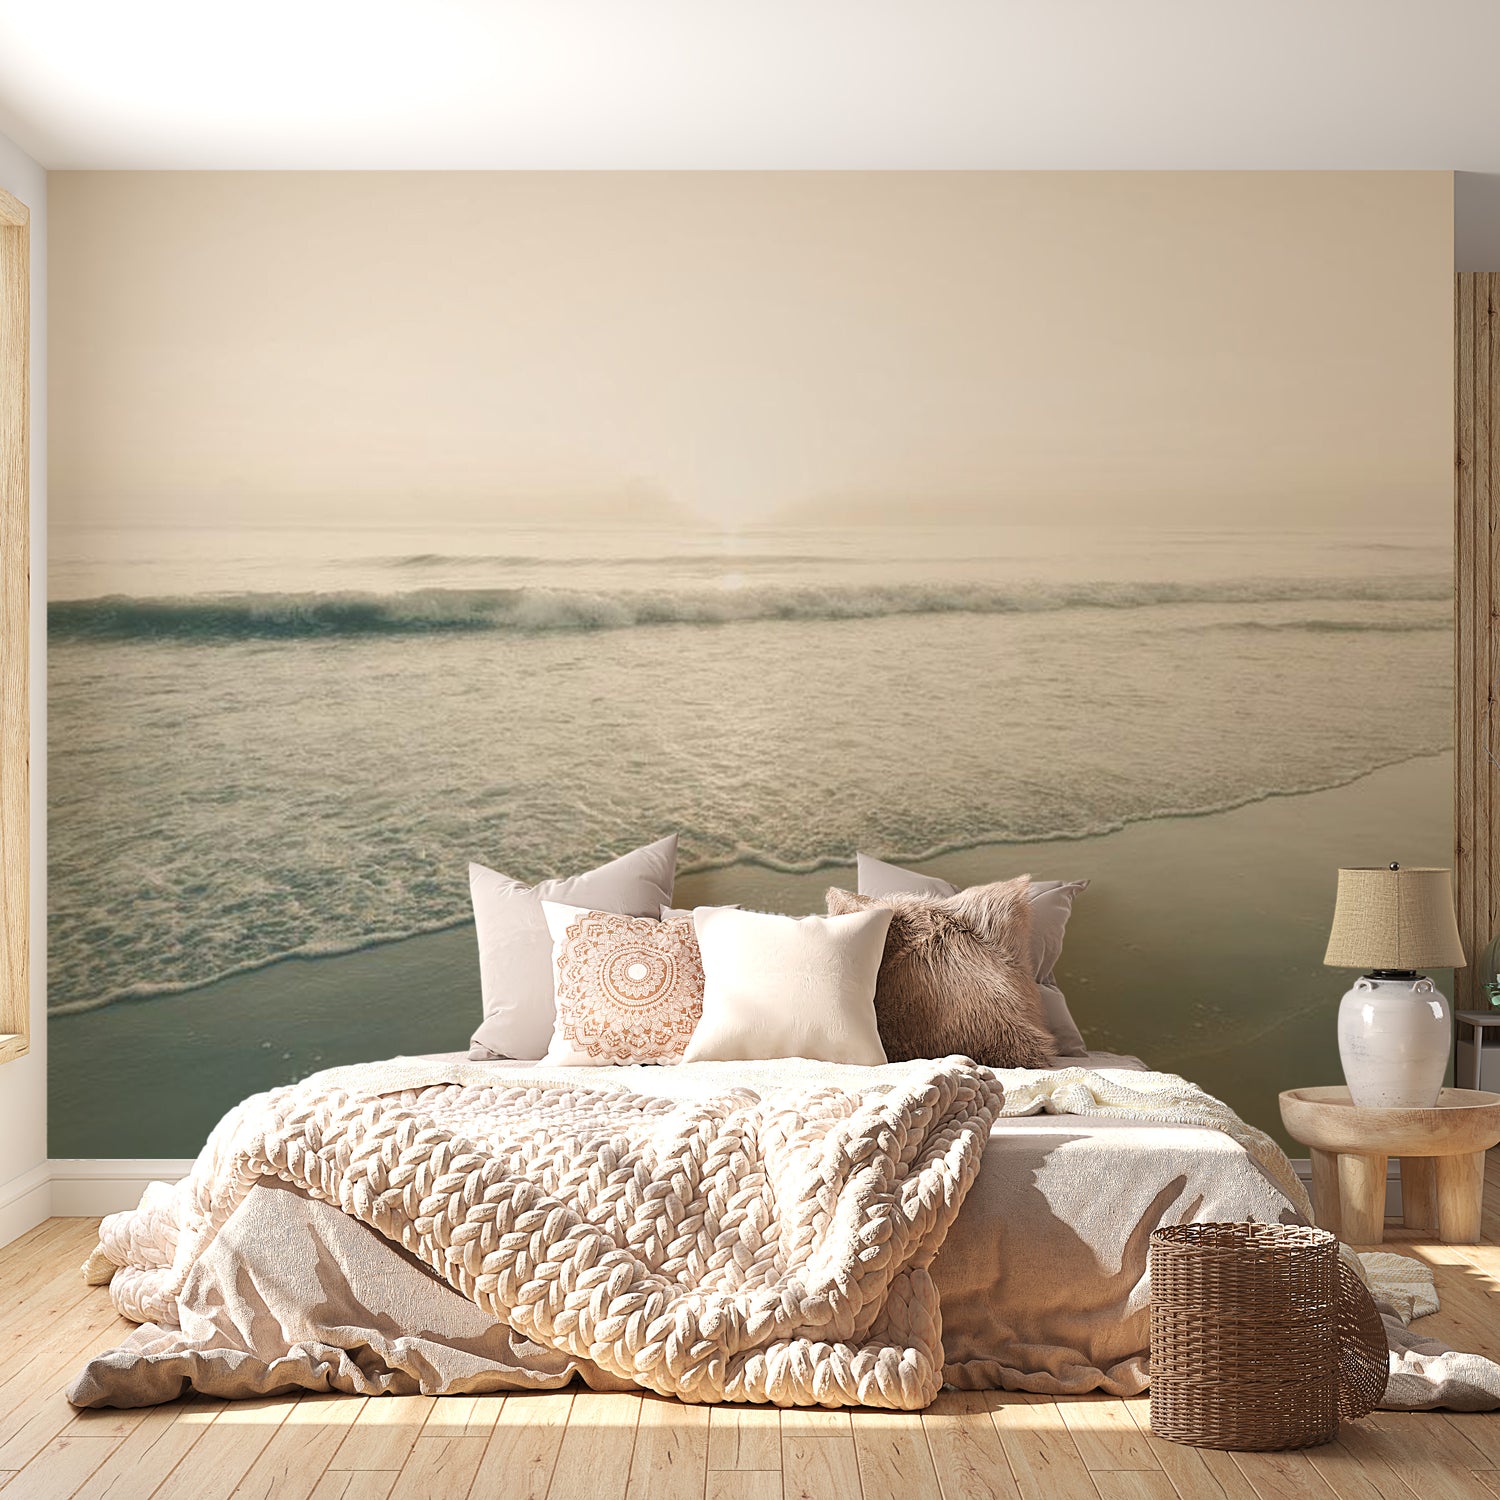 Peel & Stick Beach Wall Mural - Morning Ocean View - Removable Wall Decals